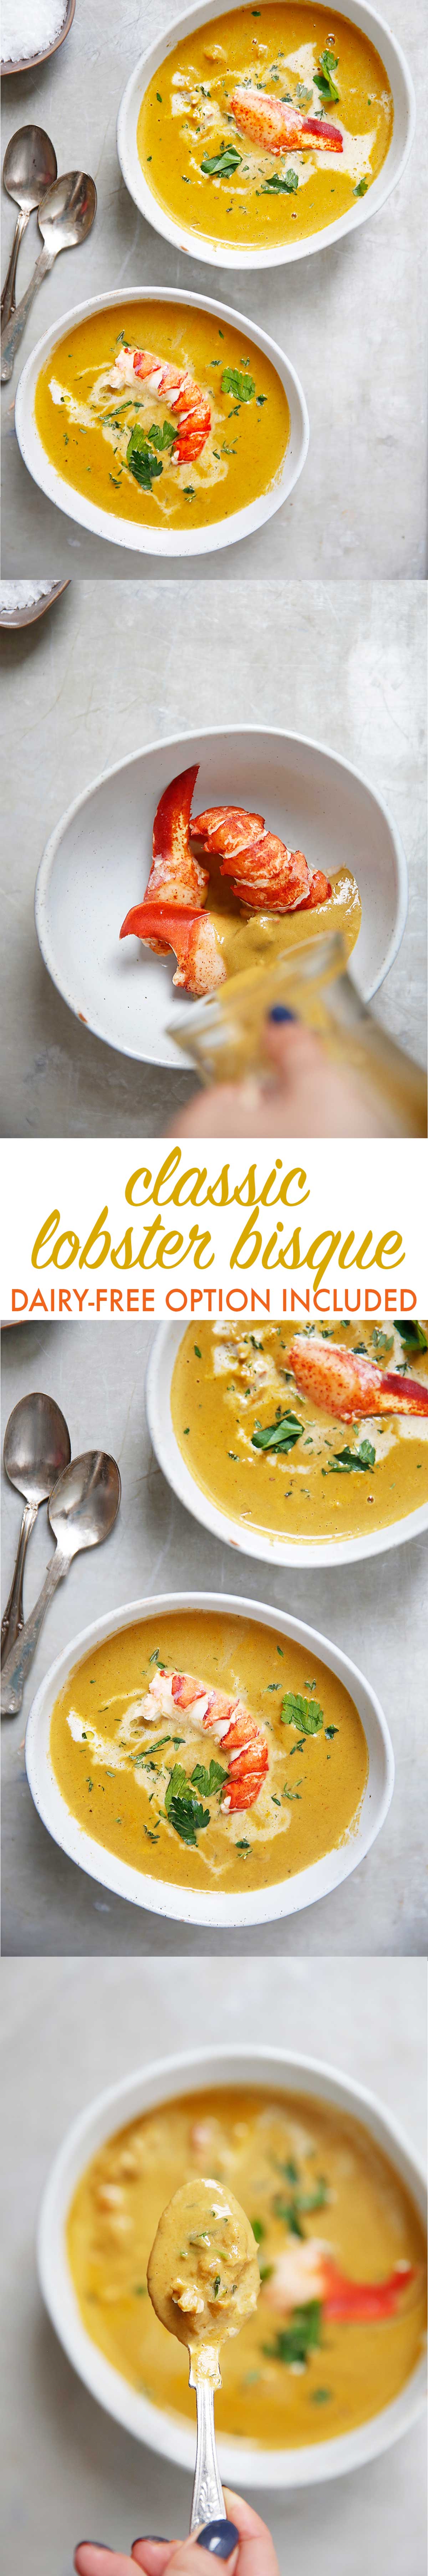 Classic Lobster Bisque {dairy-free option} | Lexi's Clean Kitchen